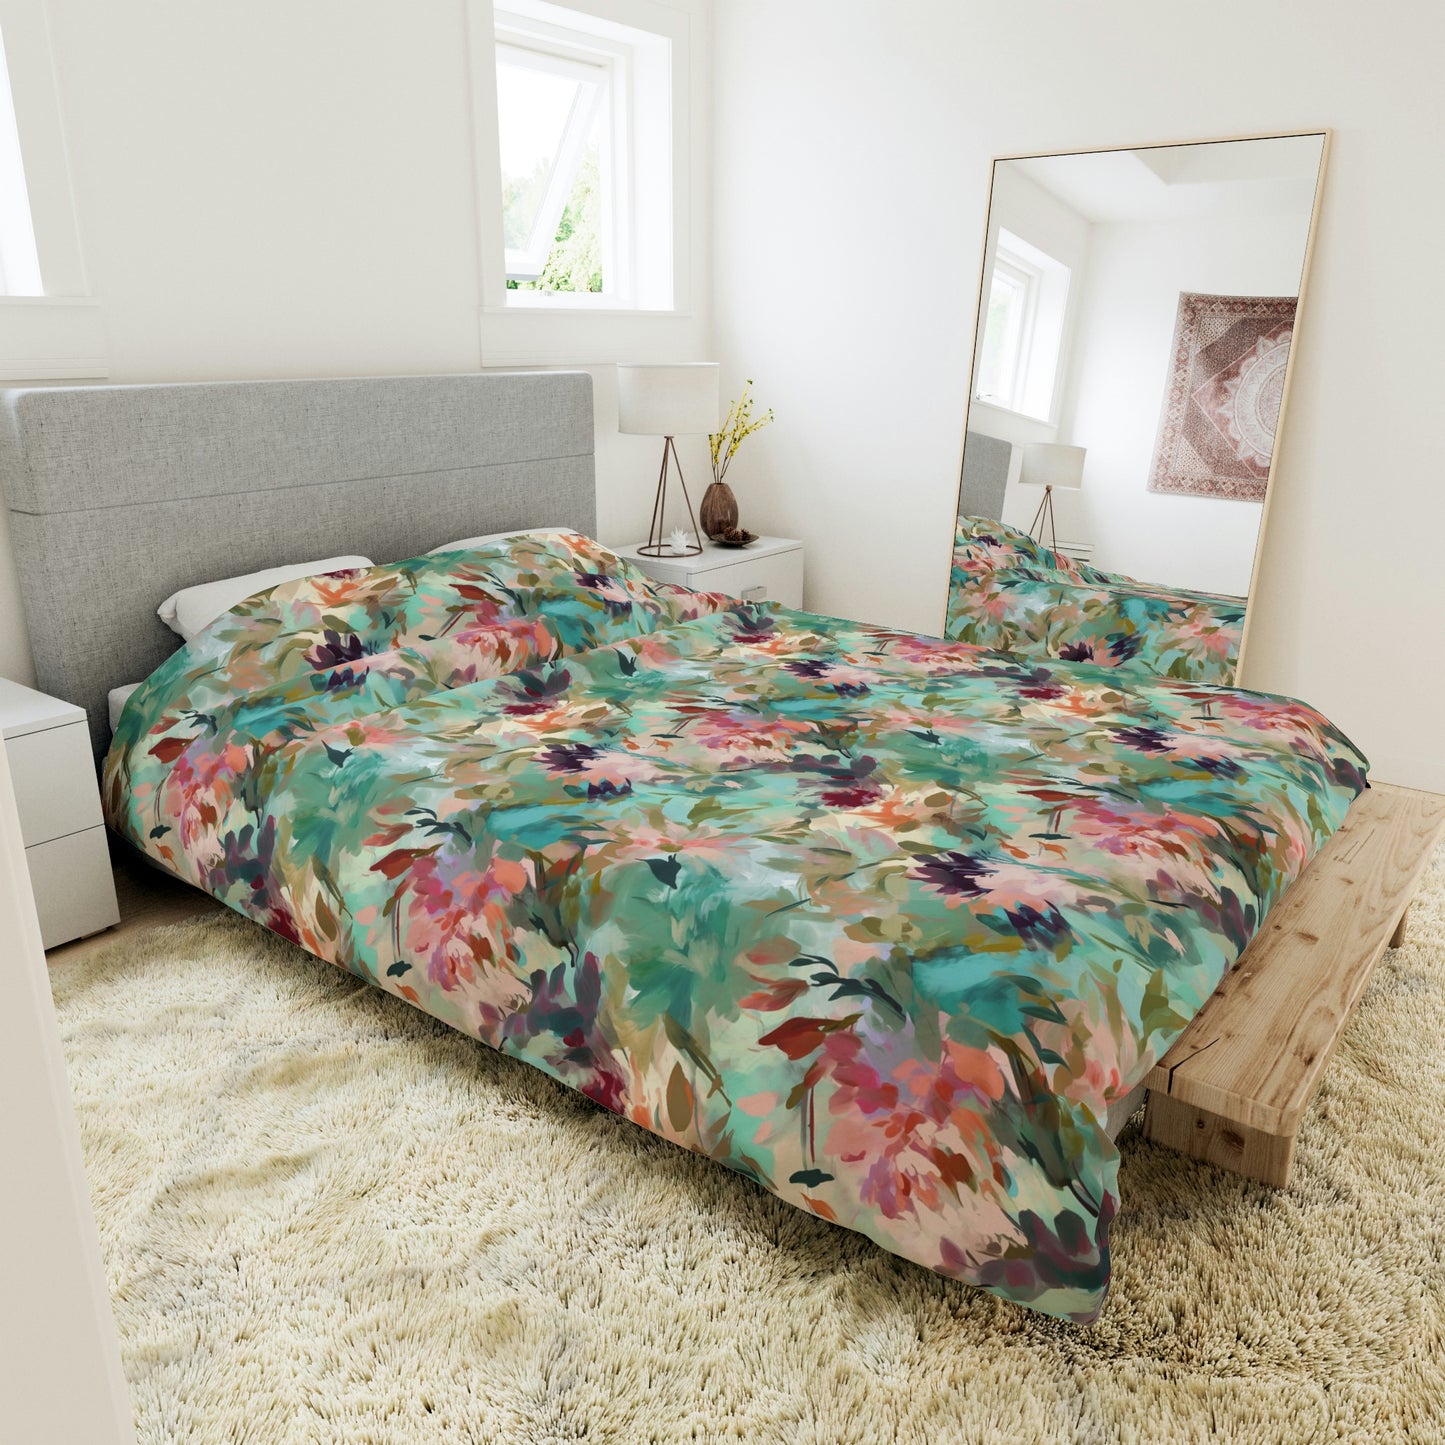 multicolor green and pink and purple floral duvet cover, green and purple floral duvet cover on bed, duvet cover with green, pink and purple abstract floral designs